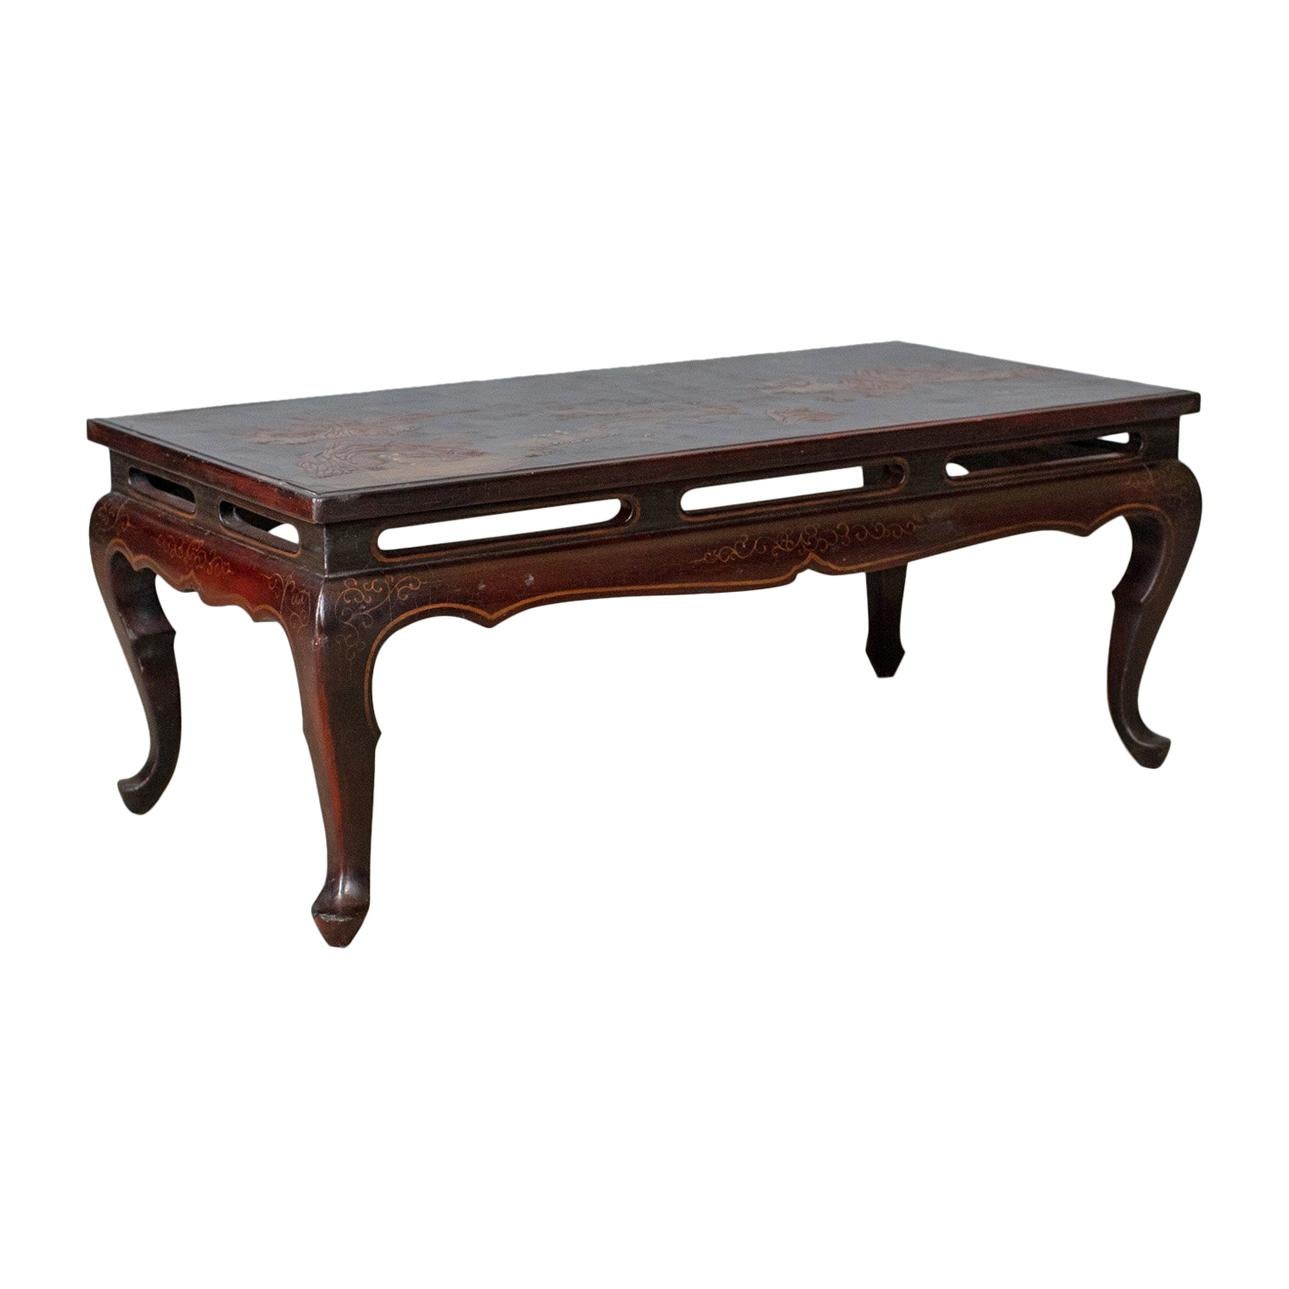 Antique Oriental Coffee Table, Low, Lacquered, Side, Edwardian, circa 1910